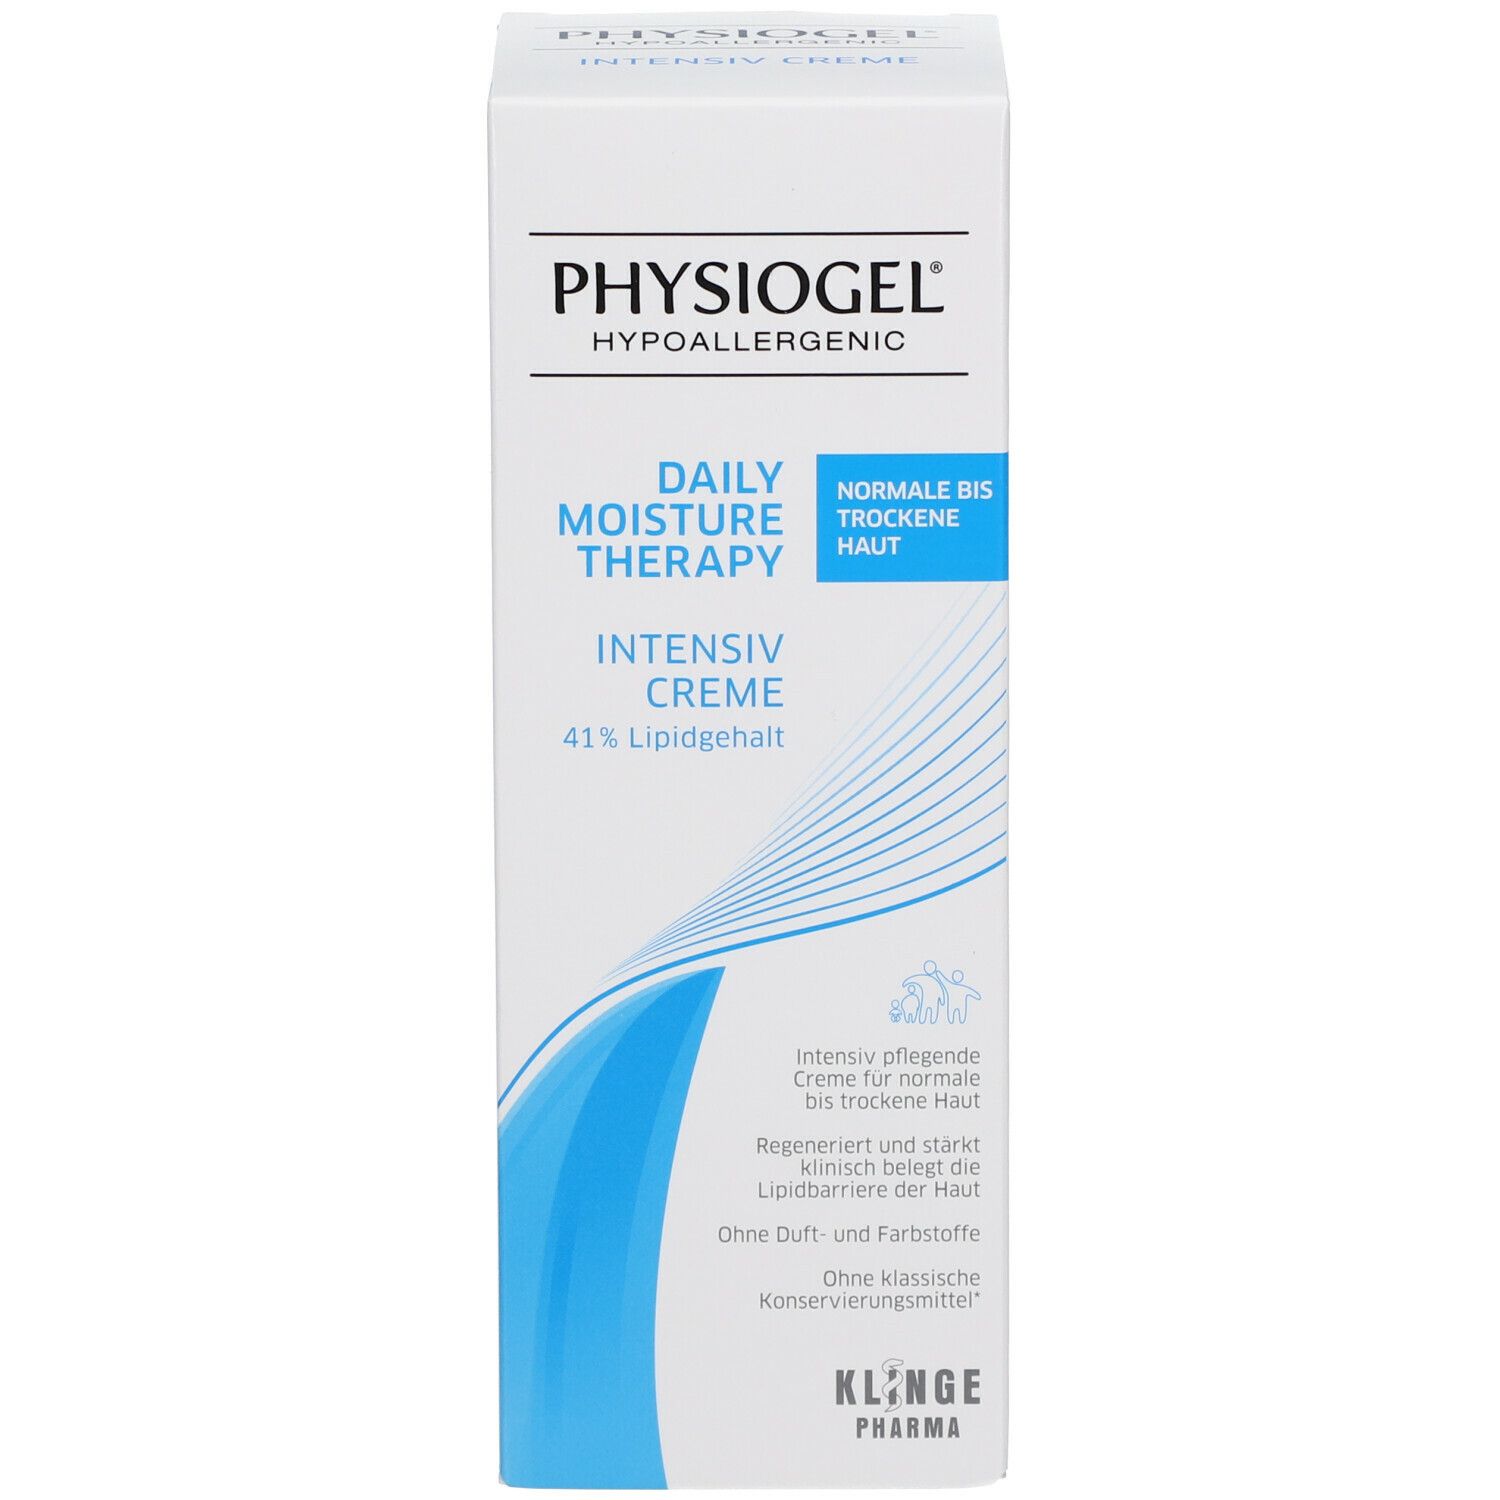 PHYSIOGEL Daily Moisture Therapy Intensiv Creme (crème hydratante quotidienne)